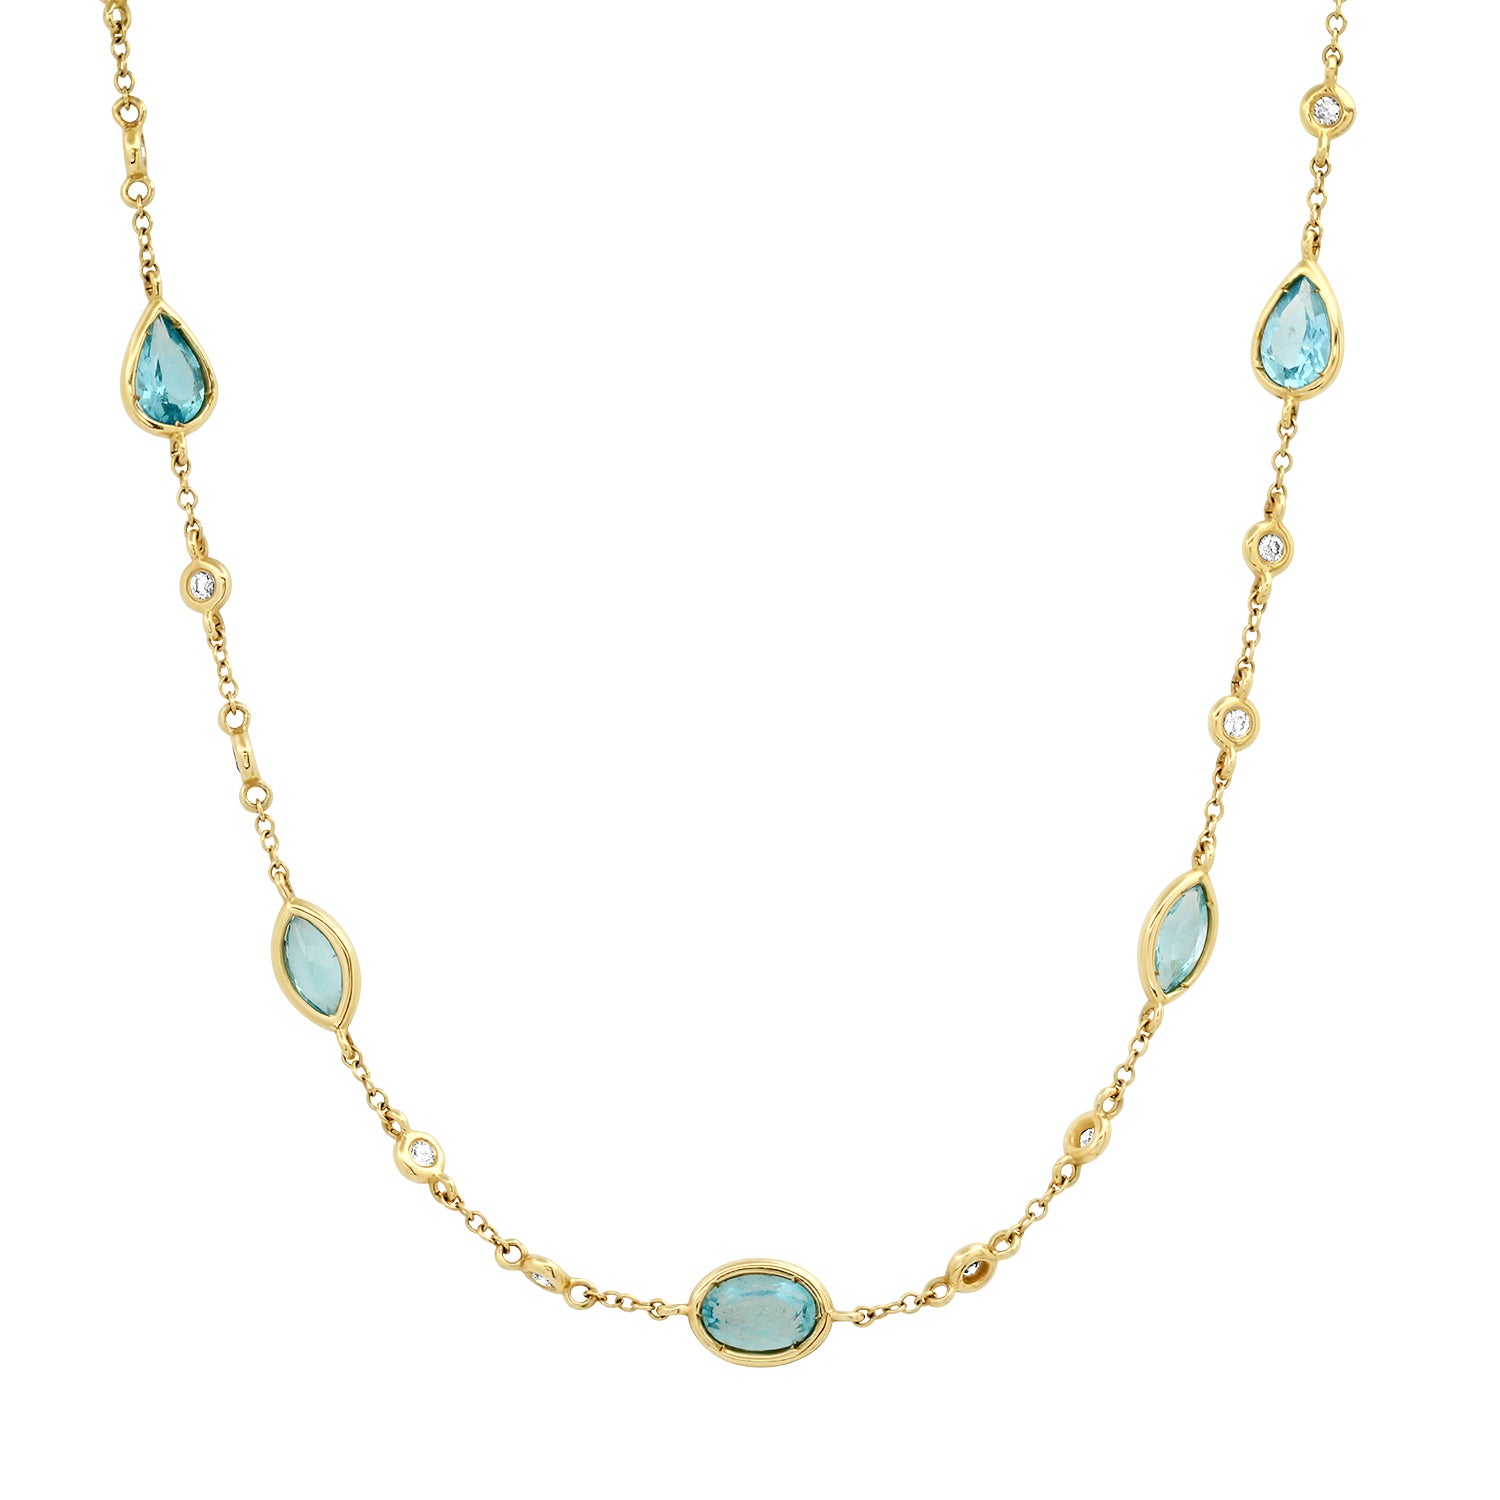 Apatite & Diamonds by the Yard Shapes Necklace or Lariat